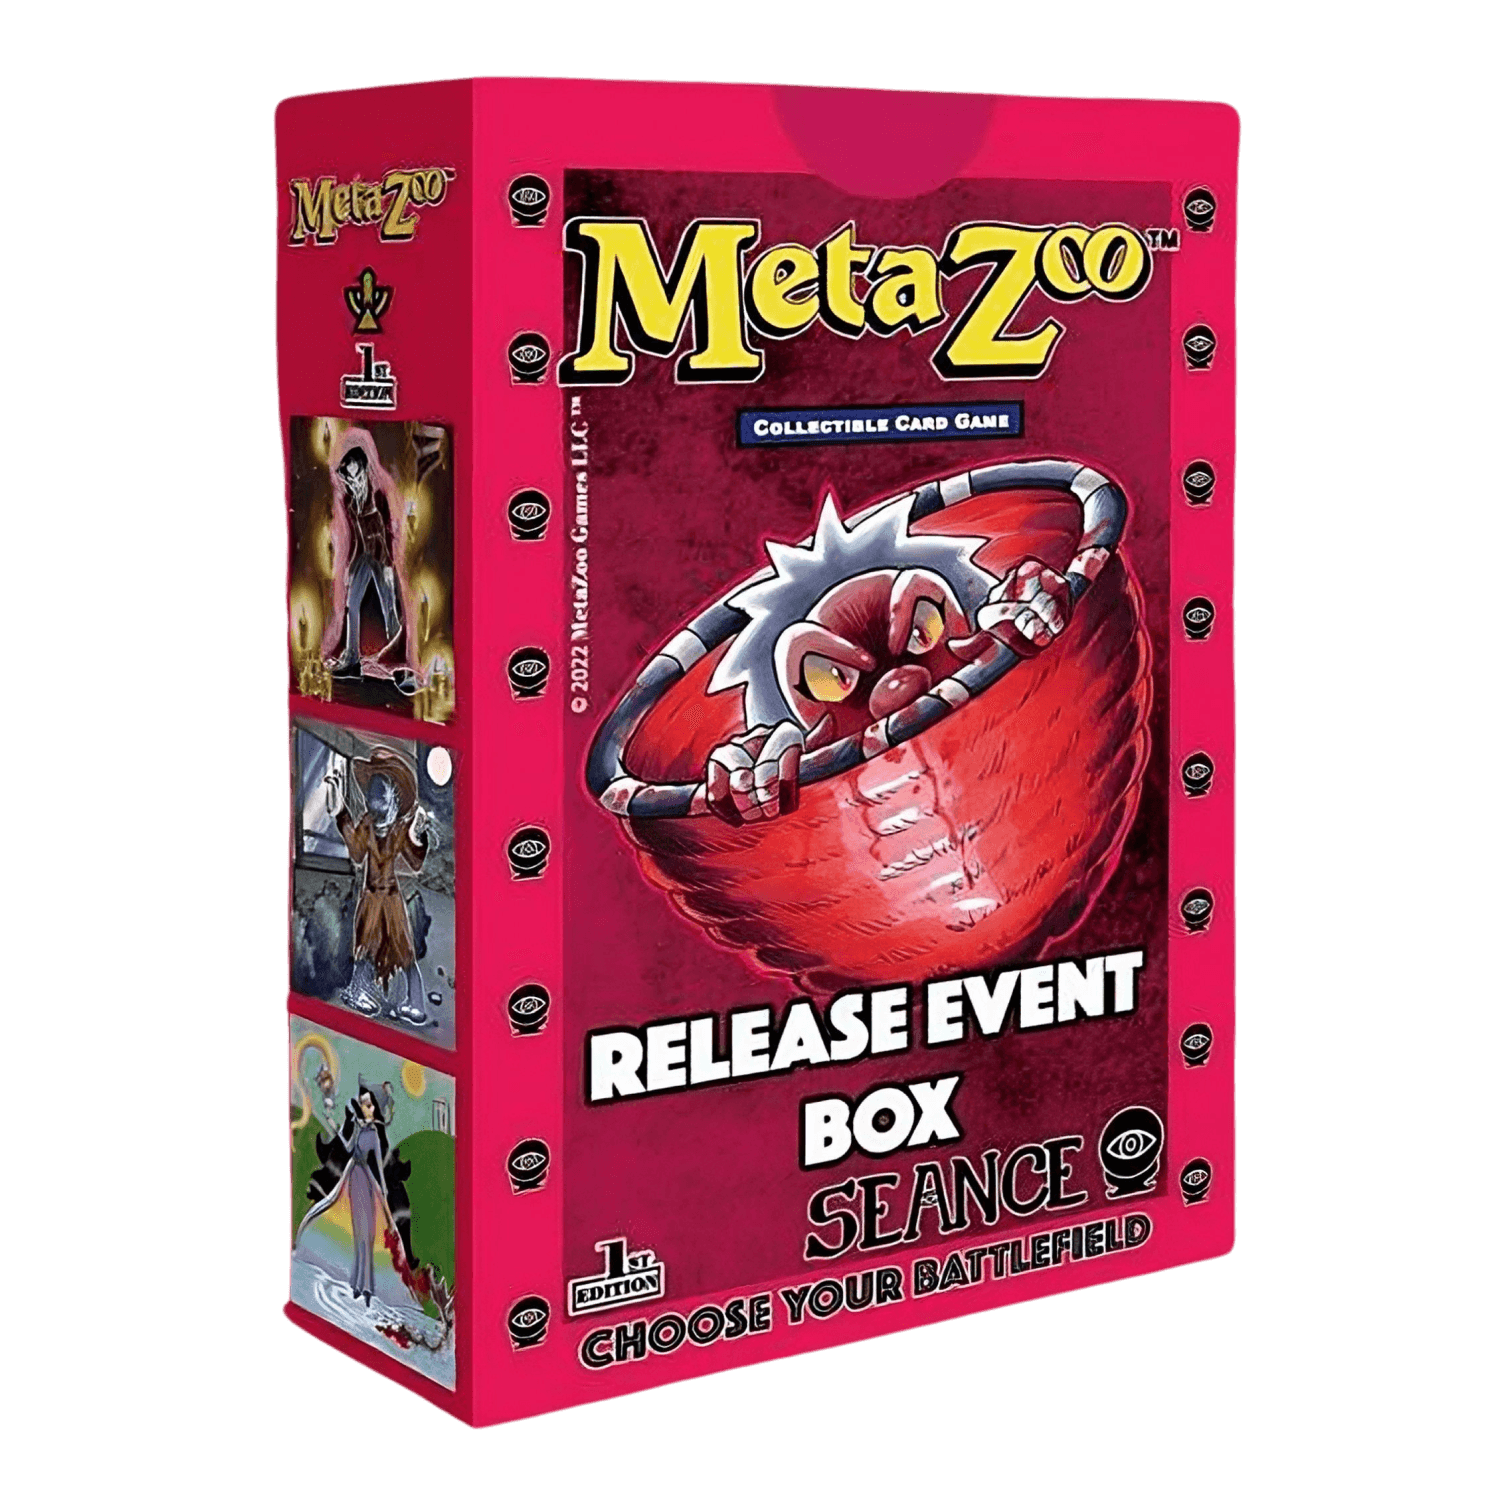 MetaZoo TCG: Seance Release Event Box (1st Edition) - The Card Vault